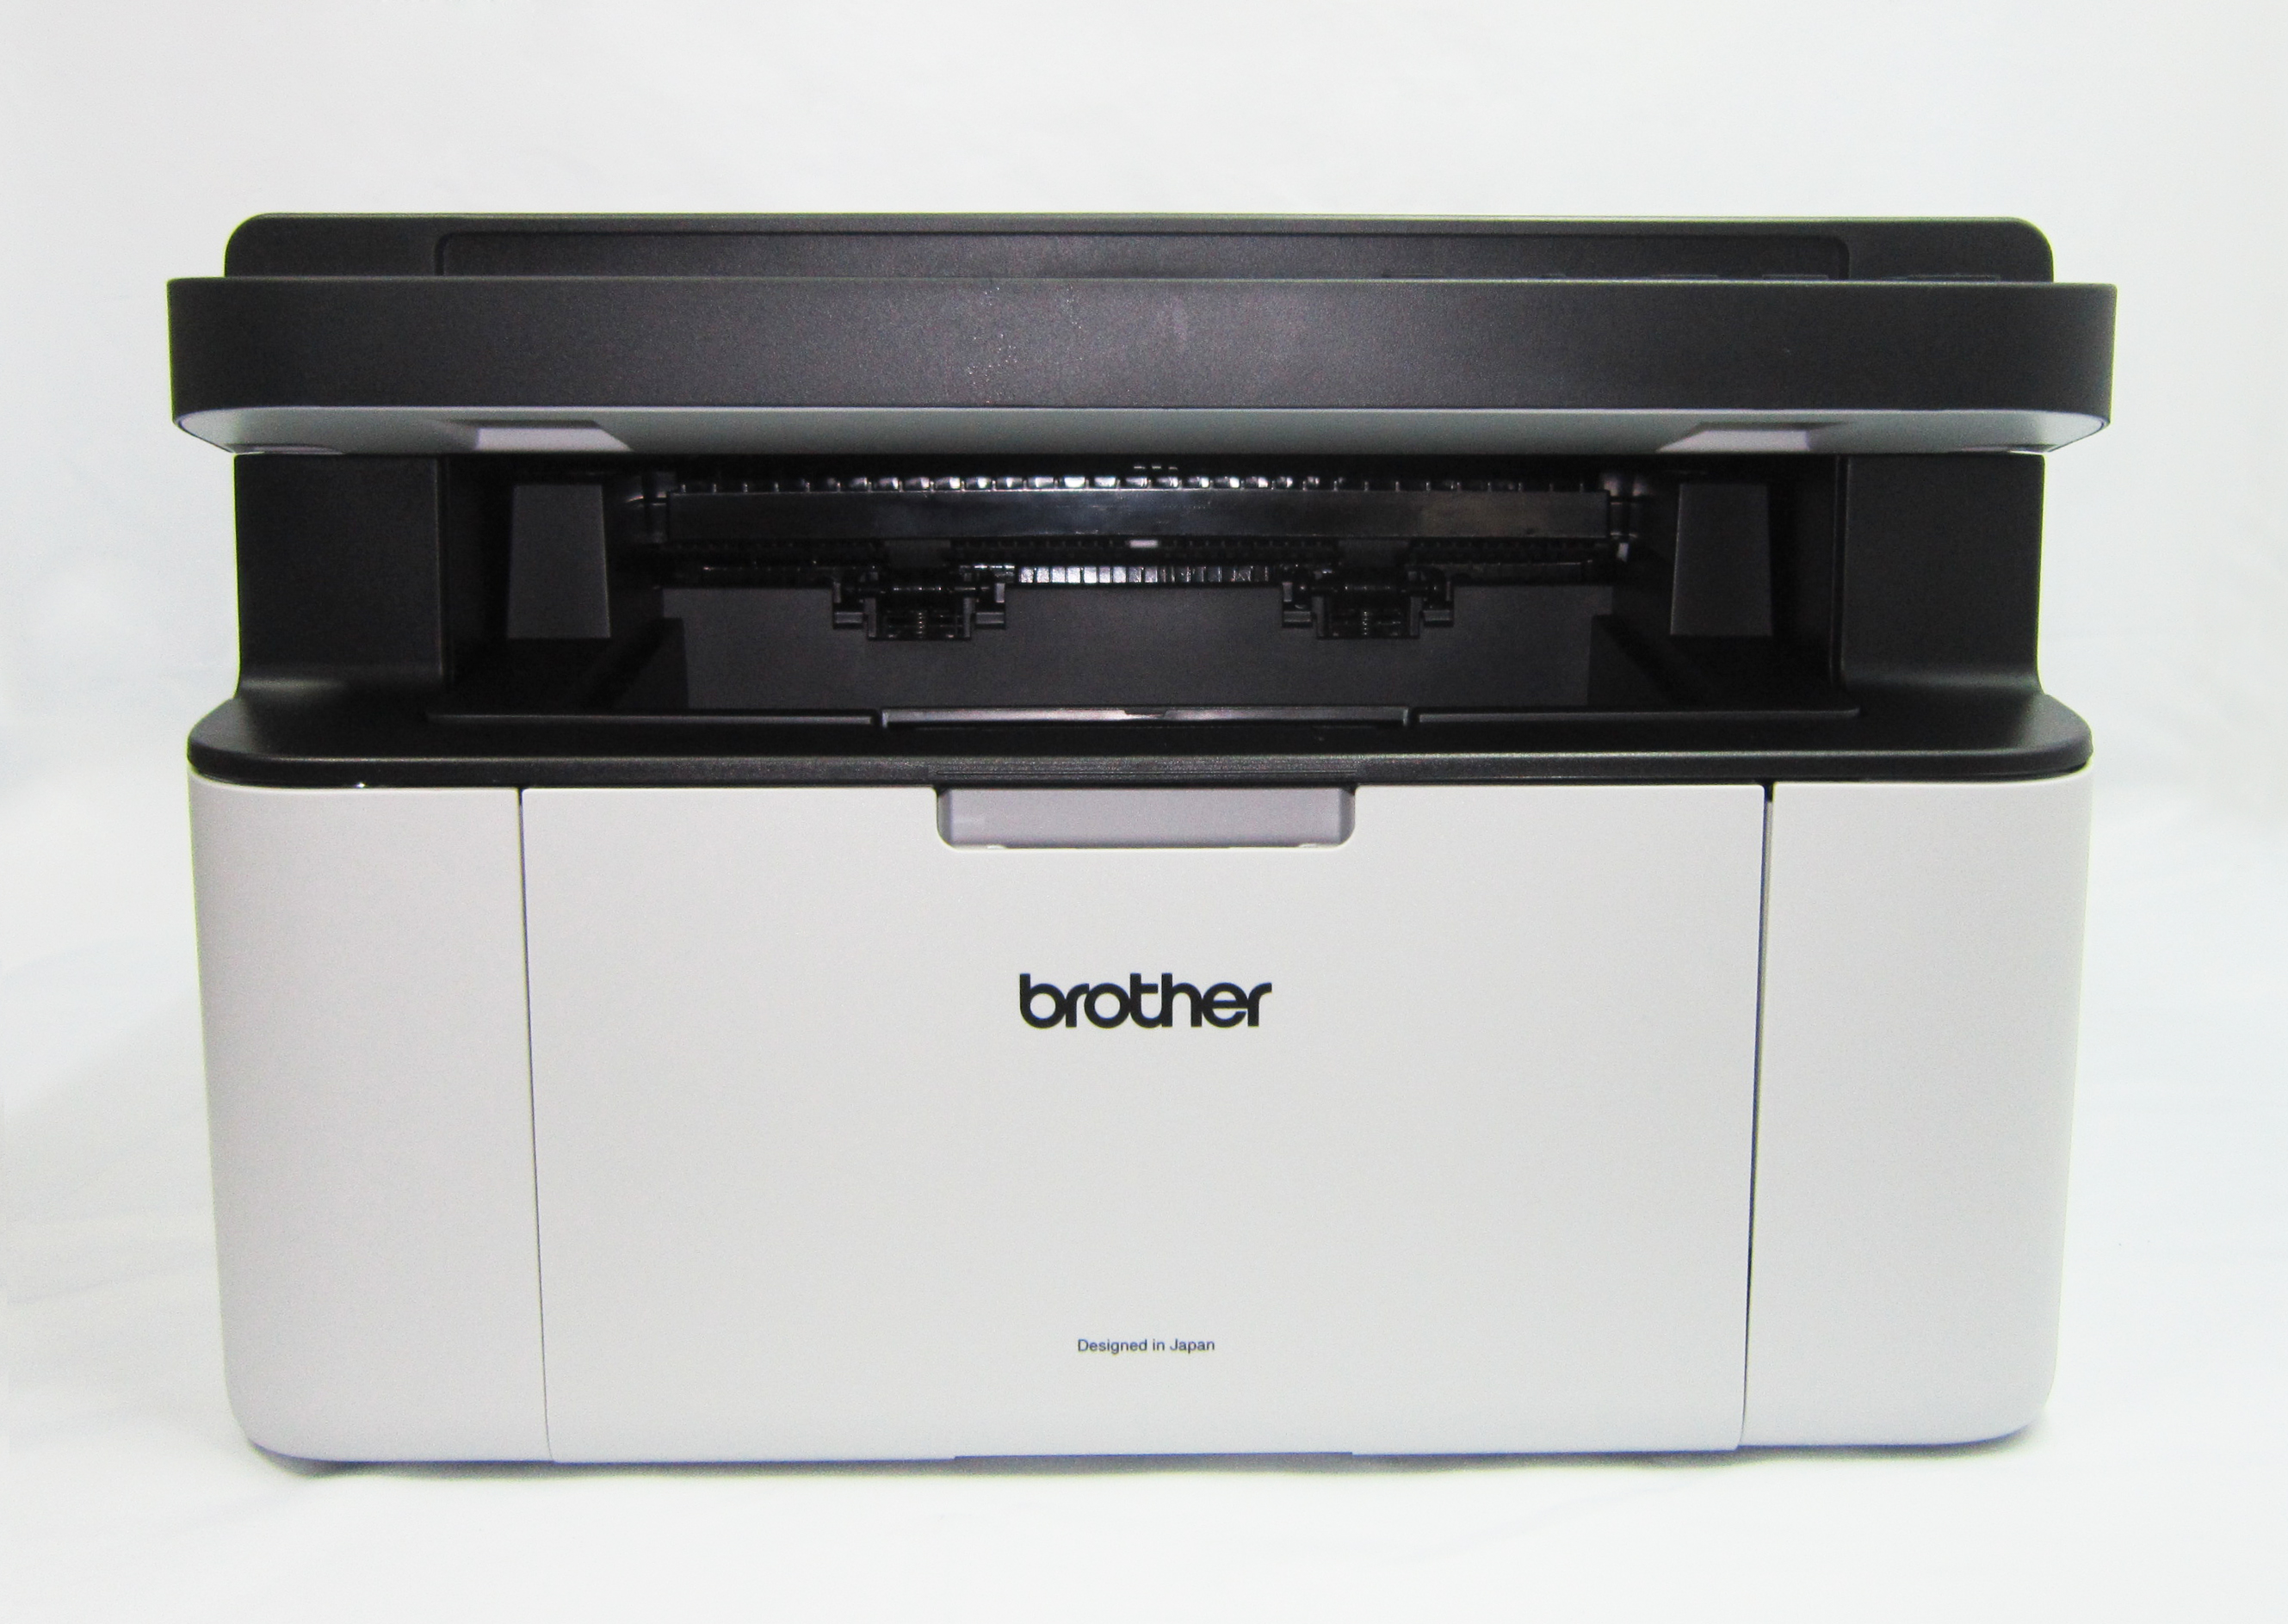 Brother dcp 1623wr. Принтер бротхер 1510. МФУ лазерное brother DCP-1510r "3 в 1". Brother DC 1510. DCP-1510r картридж.